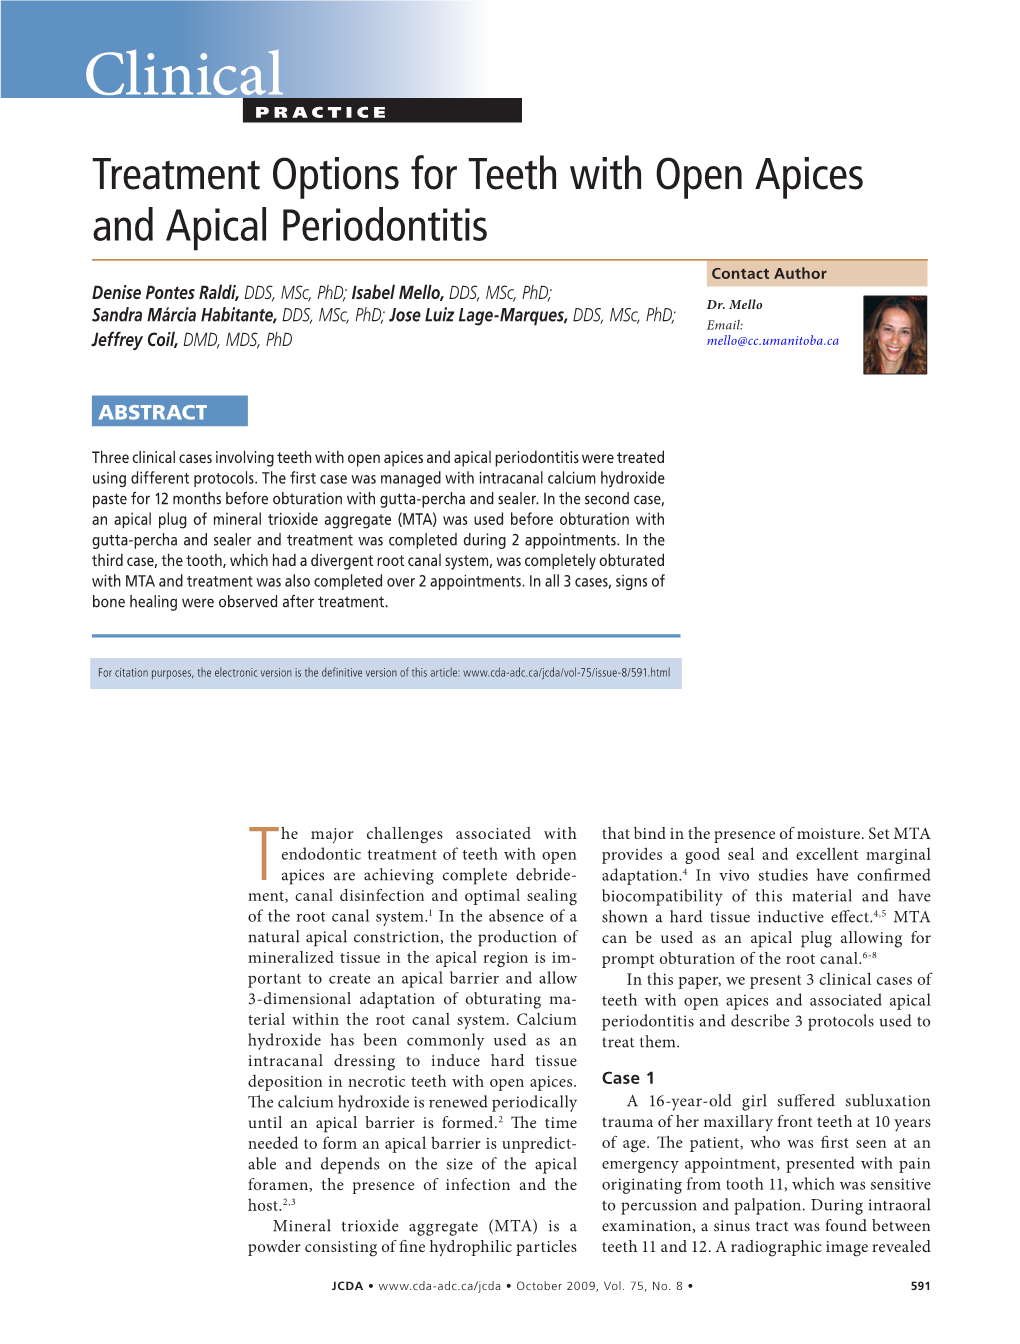 Treatment Options for Teeth with Open Apices and Apical Periodontitis